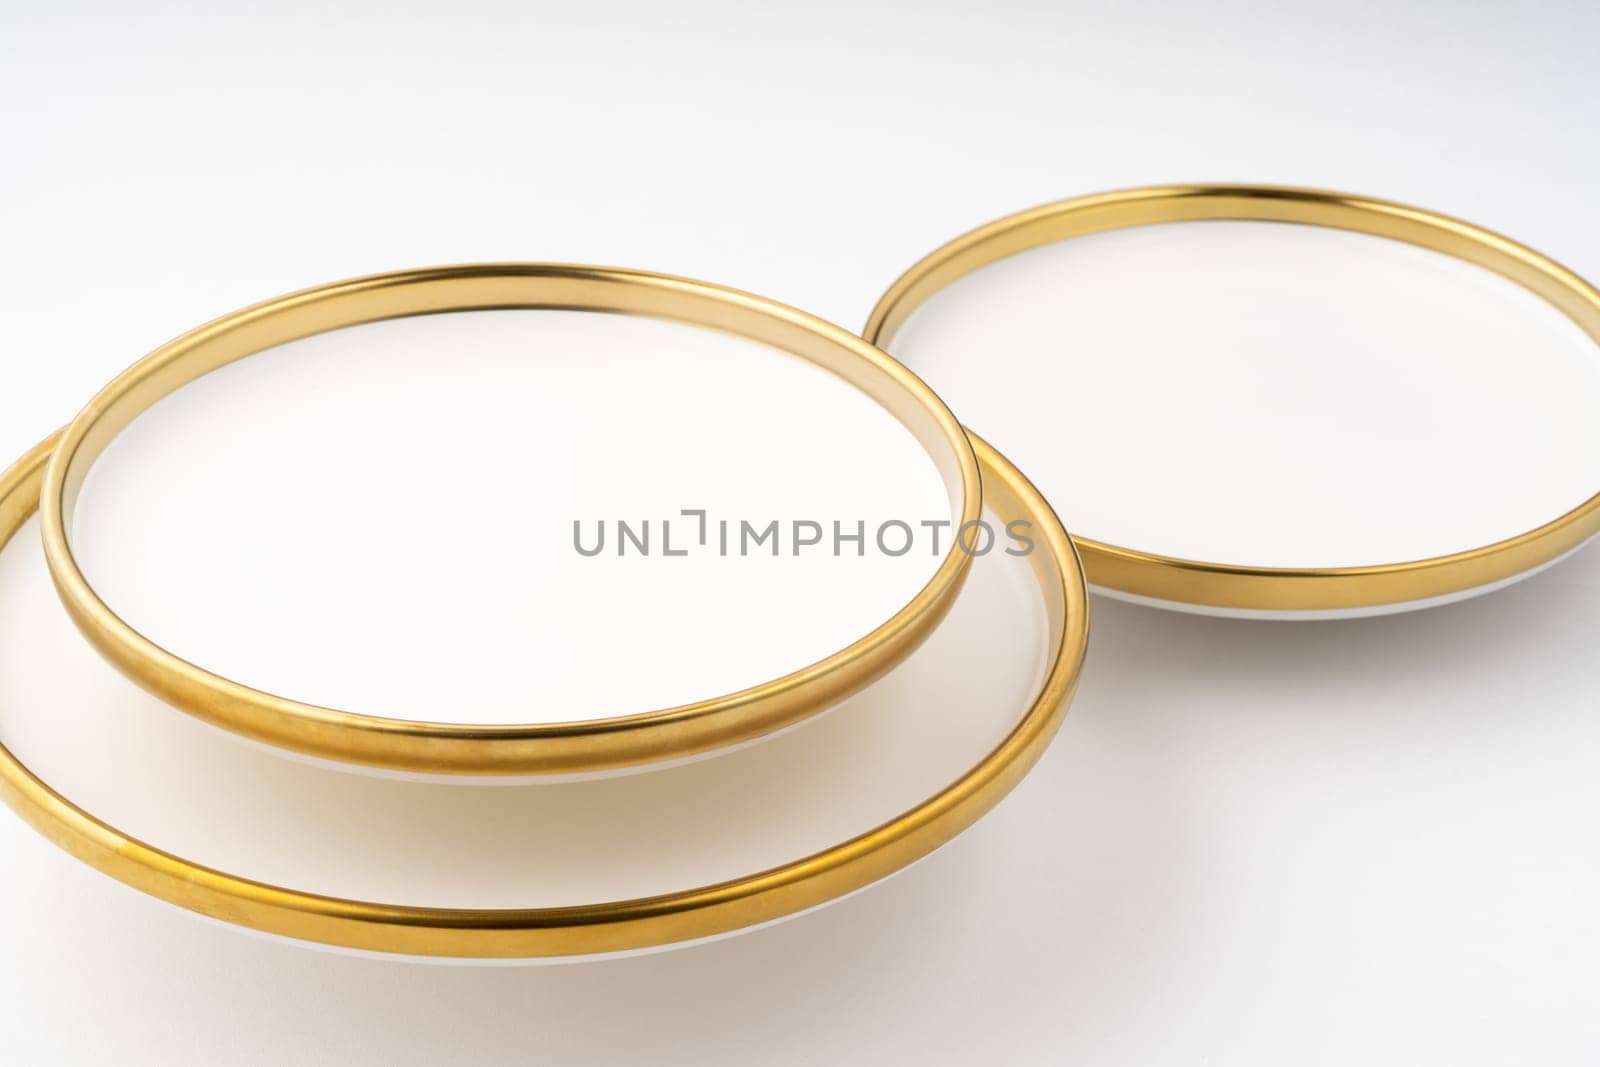 A set of white and brown ceramic plates on a white background